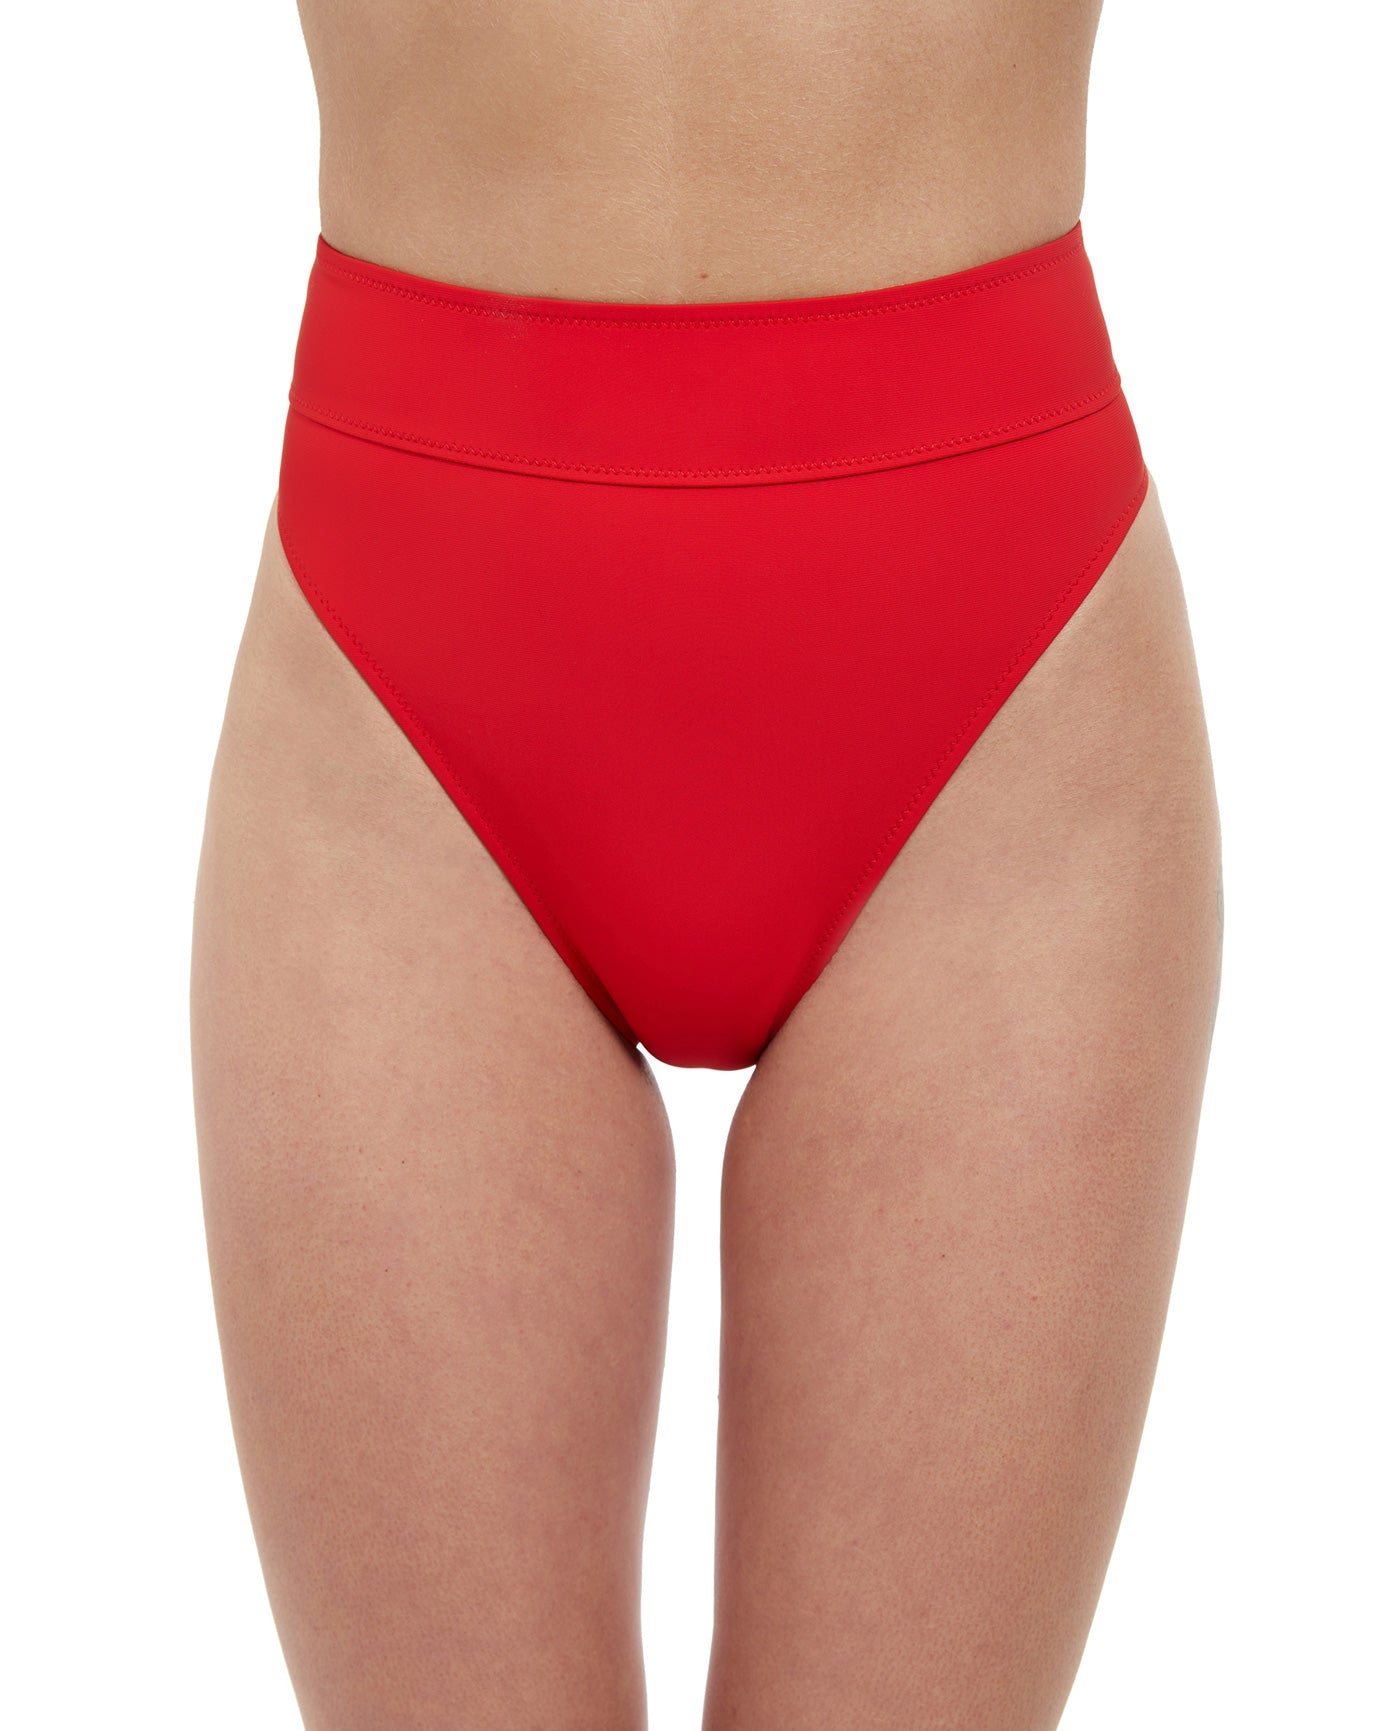 Front View Of Free Sport Ultimate Wave Full Coverage Bikini Bottom | FREE SPORT ULTIMATE WAVE RED